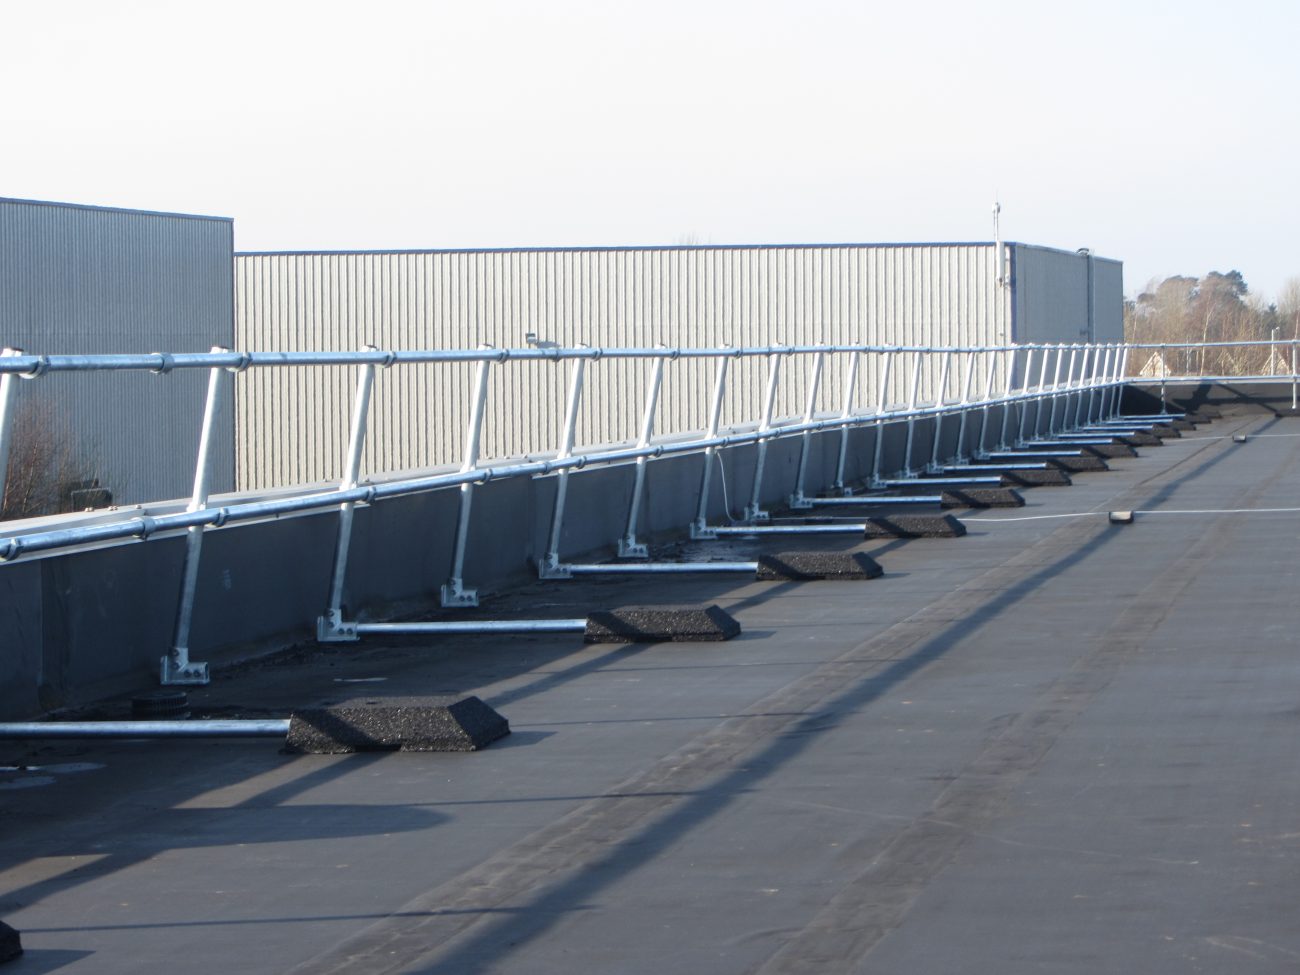 Allenkey Fittings Fall Protection Safety Guardrails Roof Edge Protection Work at Height